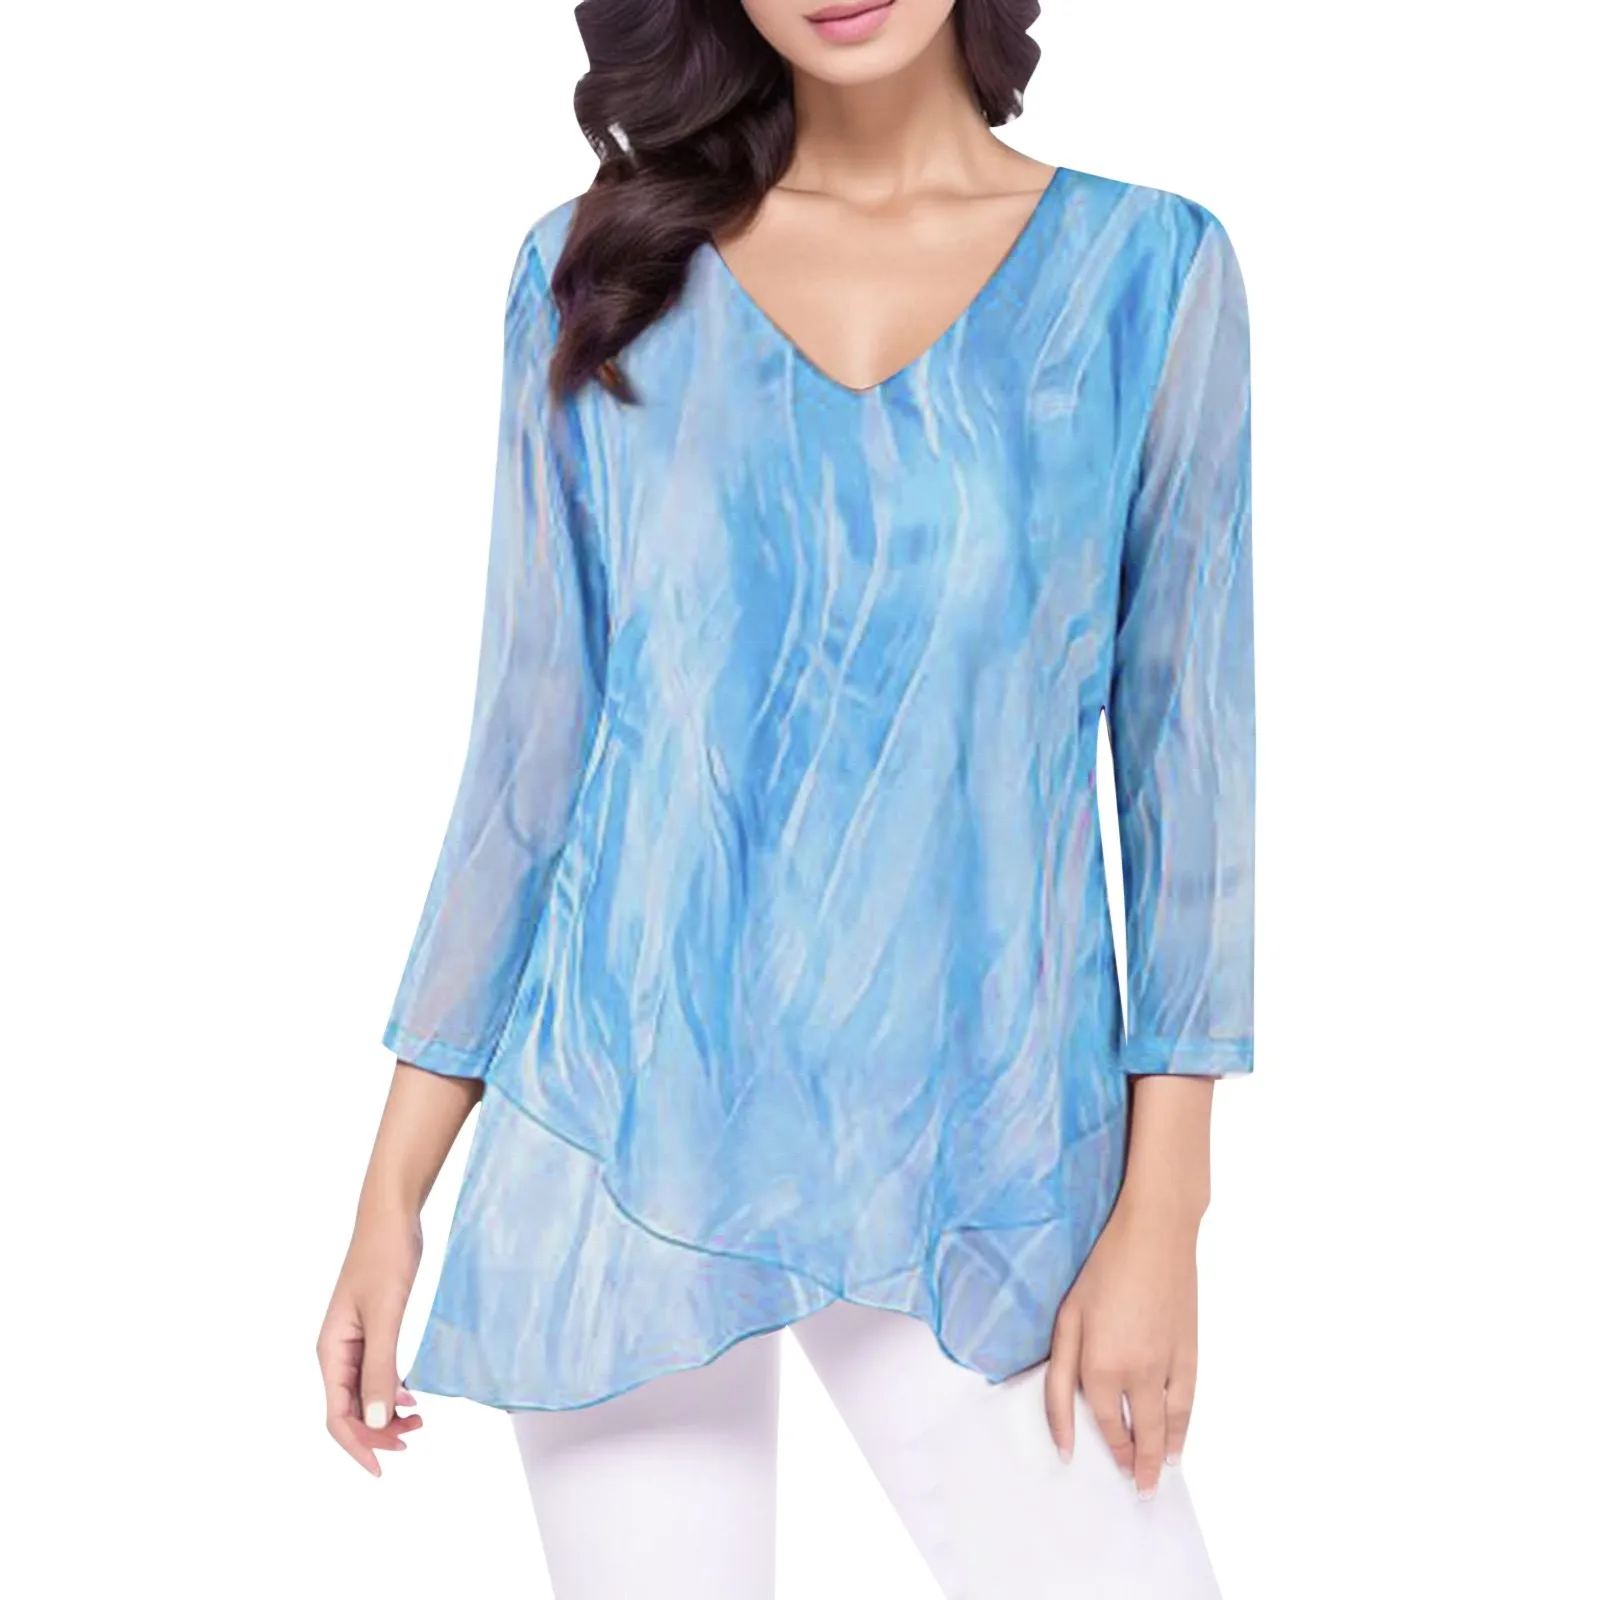 

Asymmetric Hem Mesh Printed Shirts For Women V Neck 3/4 Sleeve Loose Fit Blouses Lightweight Tunic Dressy Tops And Blouse Blusas